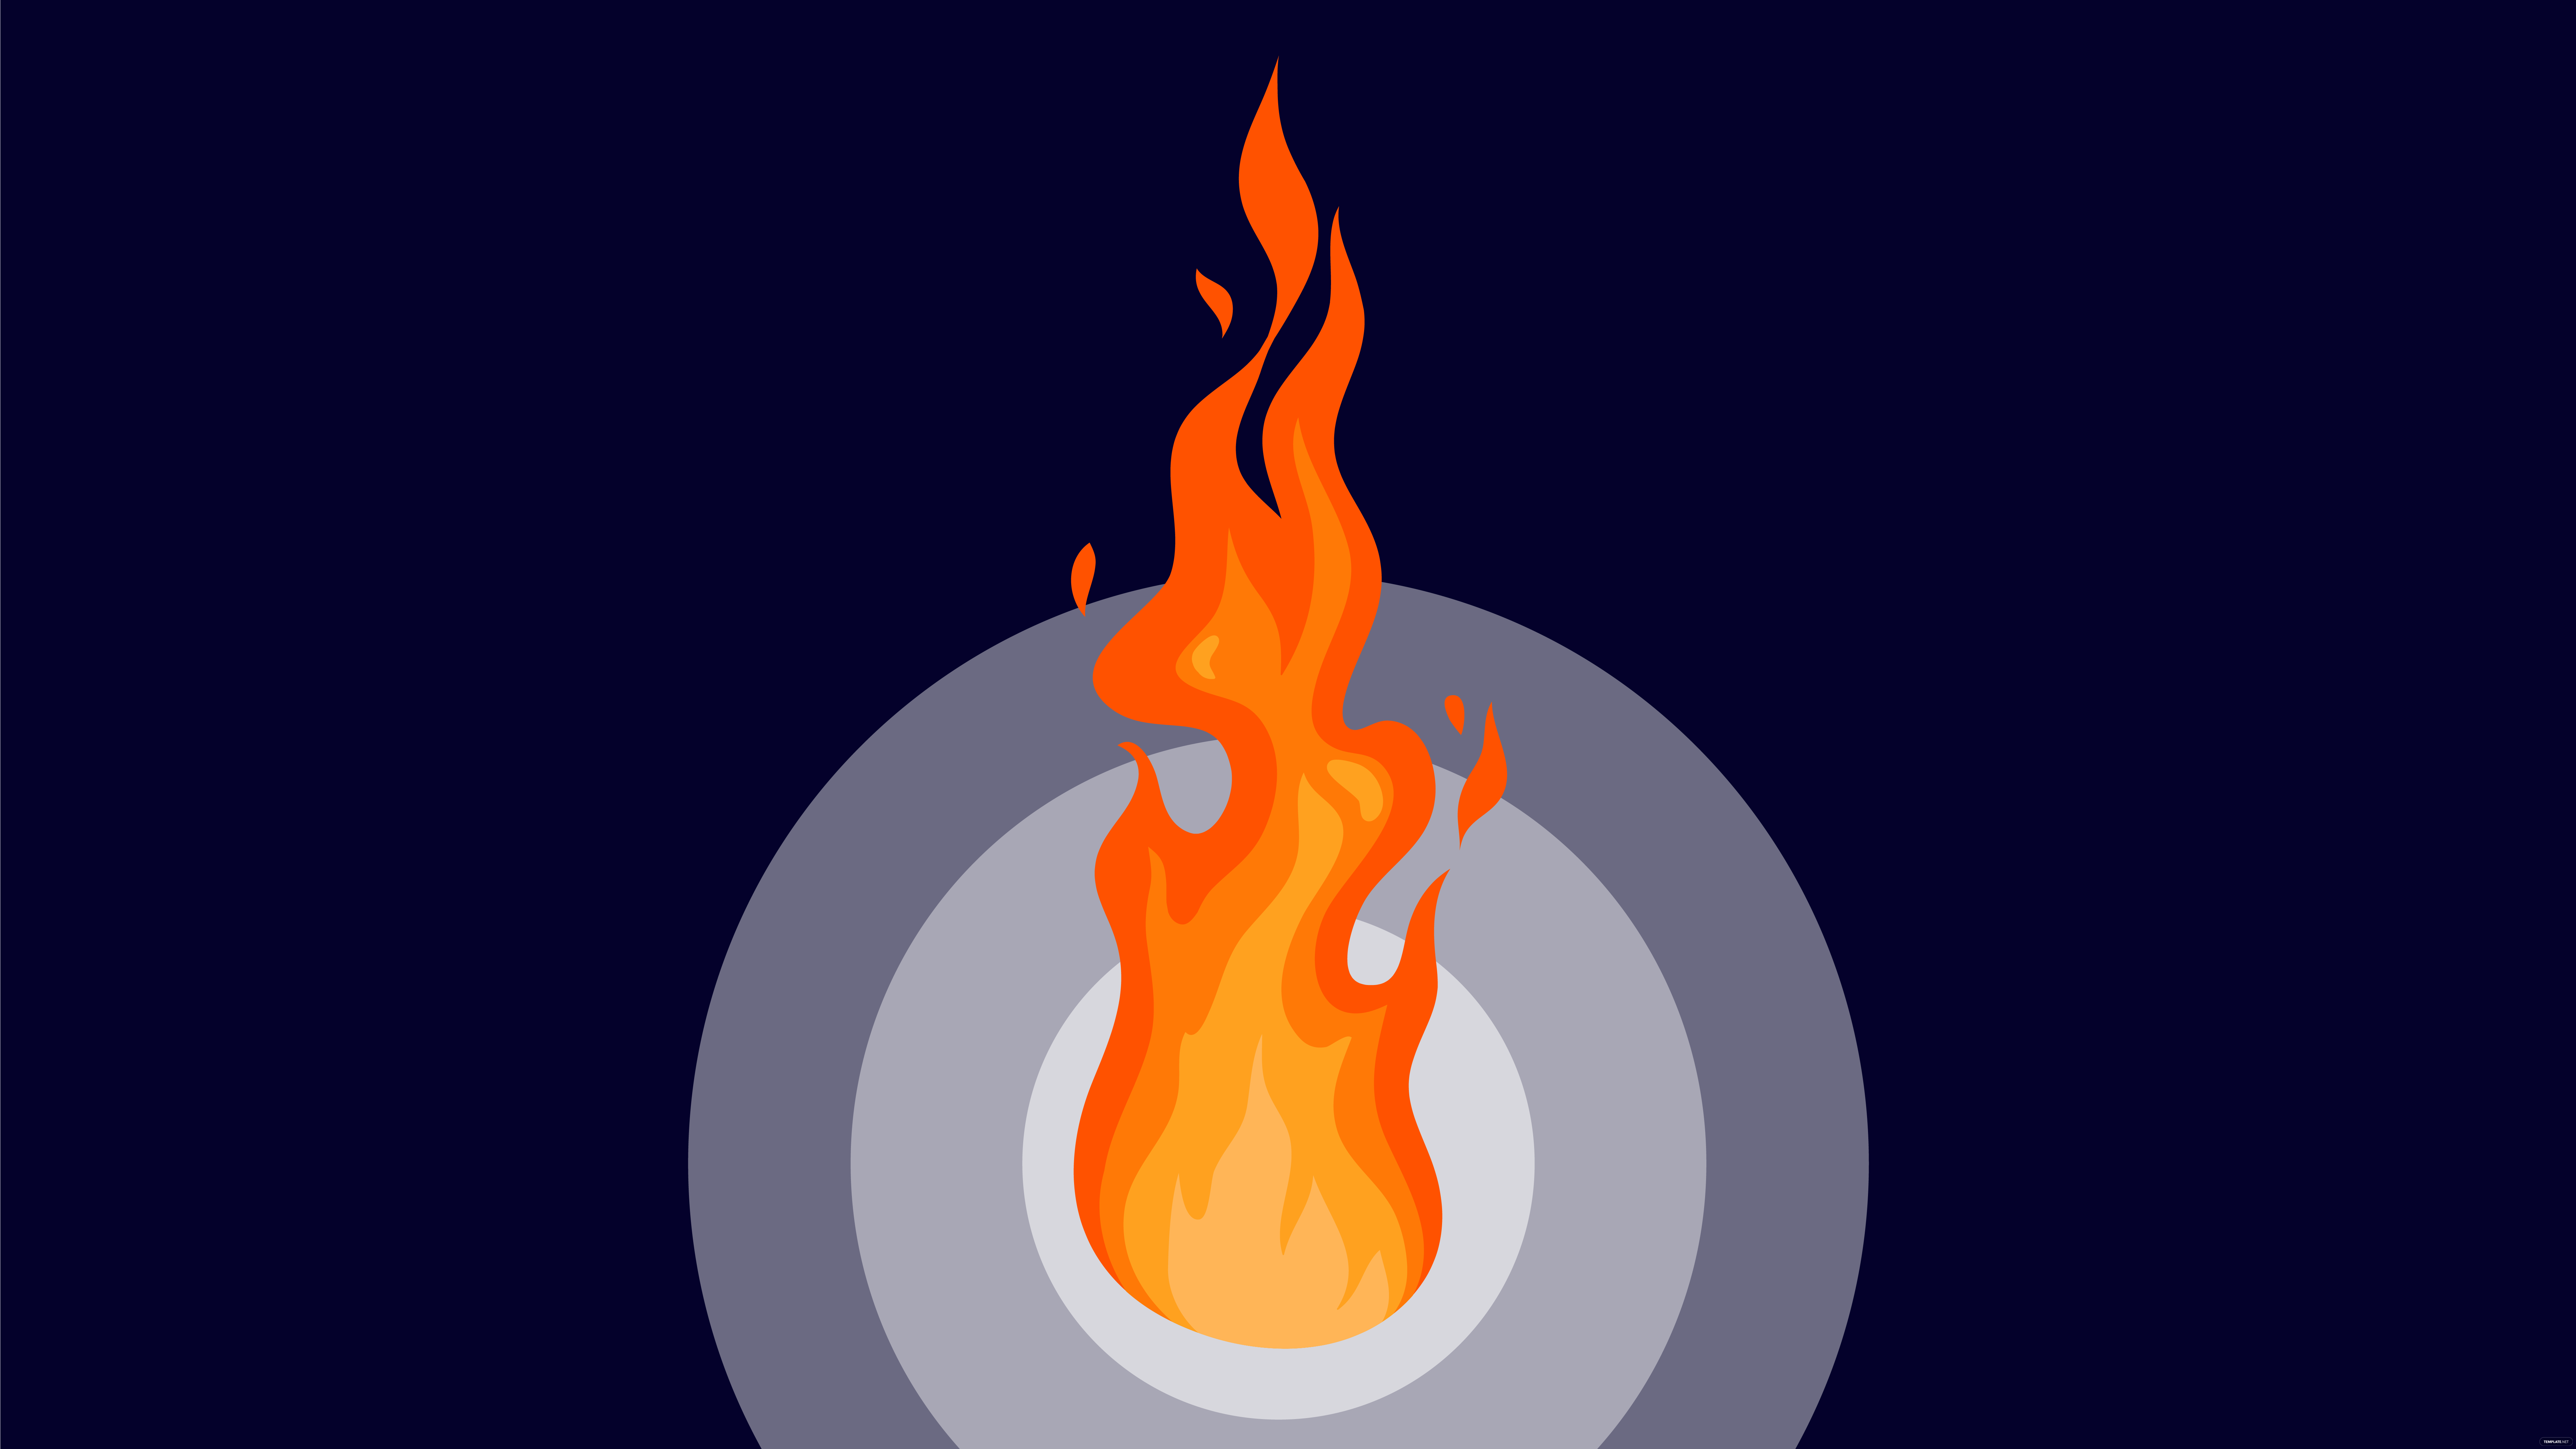 Cool Flame Backgrounds